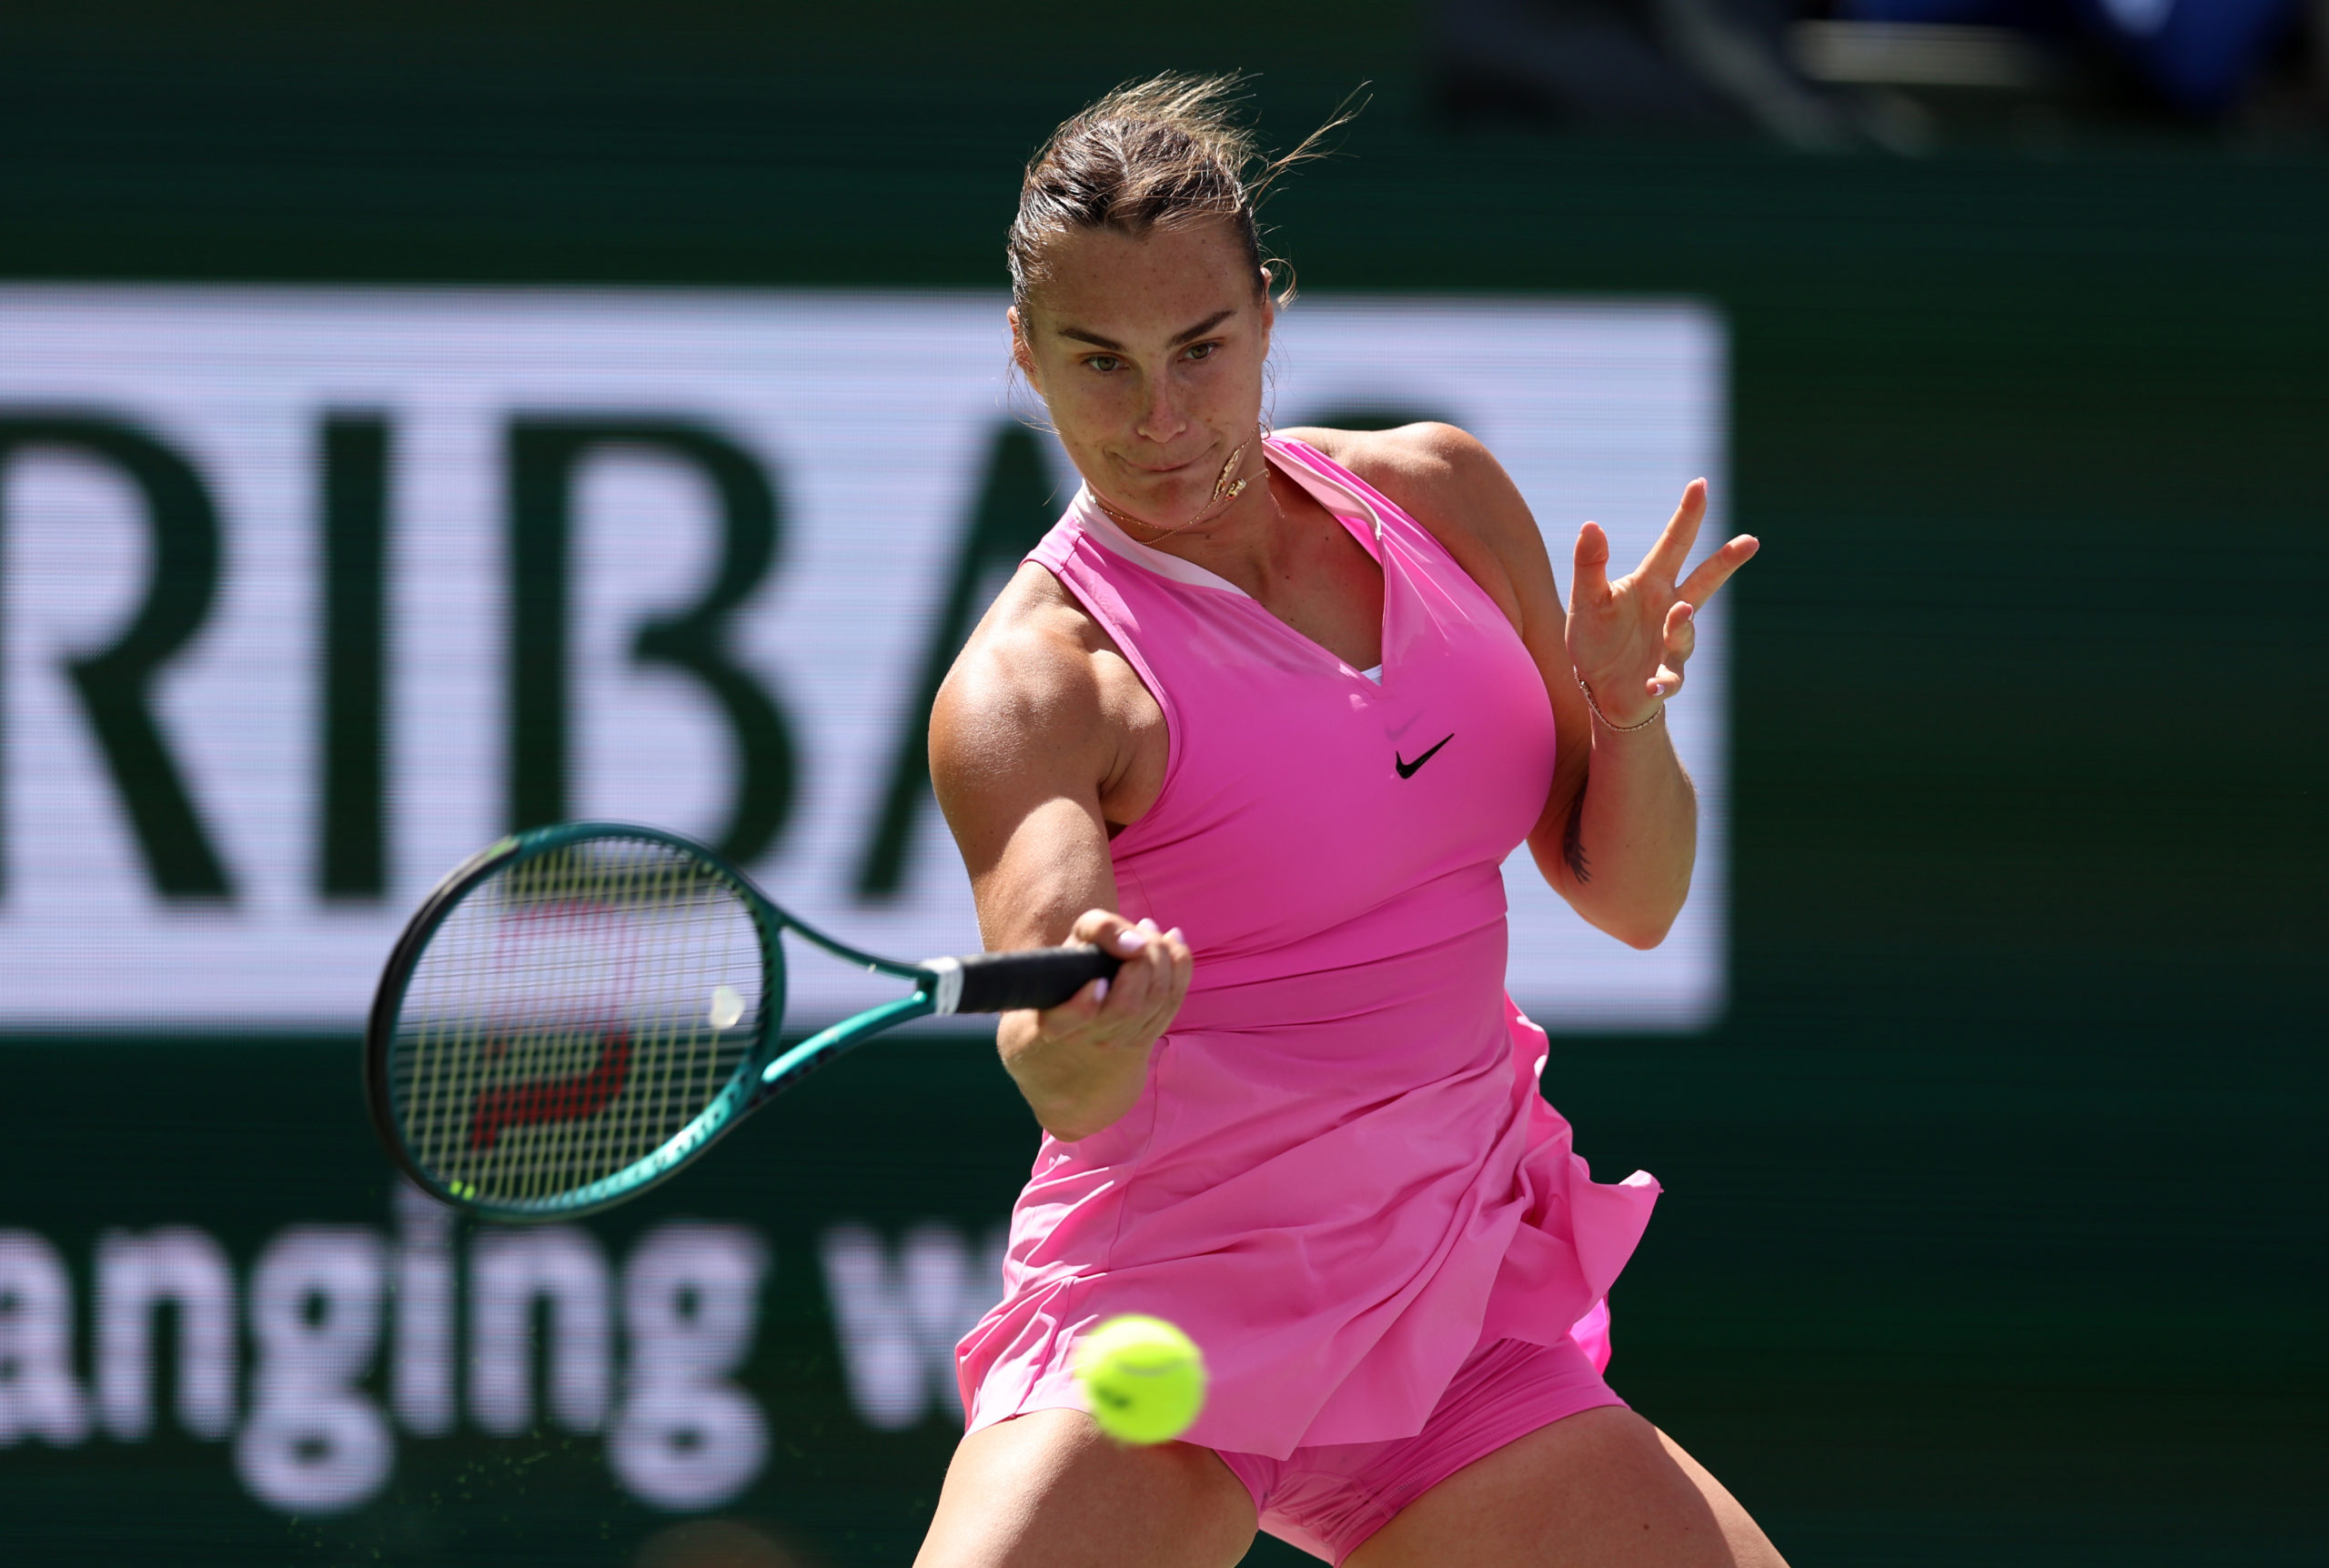 INDIAN WELLS, CALIFORNIA - MARCH 13: Aryna Sabalenka plays a forehand against Emma Navarro of the United States in their fourth round match during the BNP Paribas Open at Indian Wells Tennis Garden on March 13, 2024 in Indian Wells, California. Clive Brunskill/Getty Images